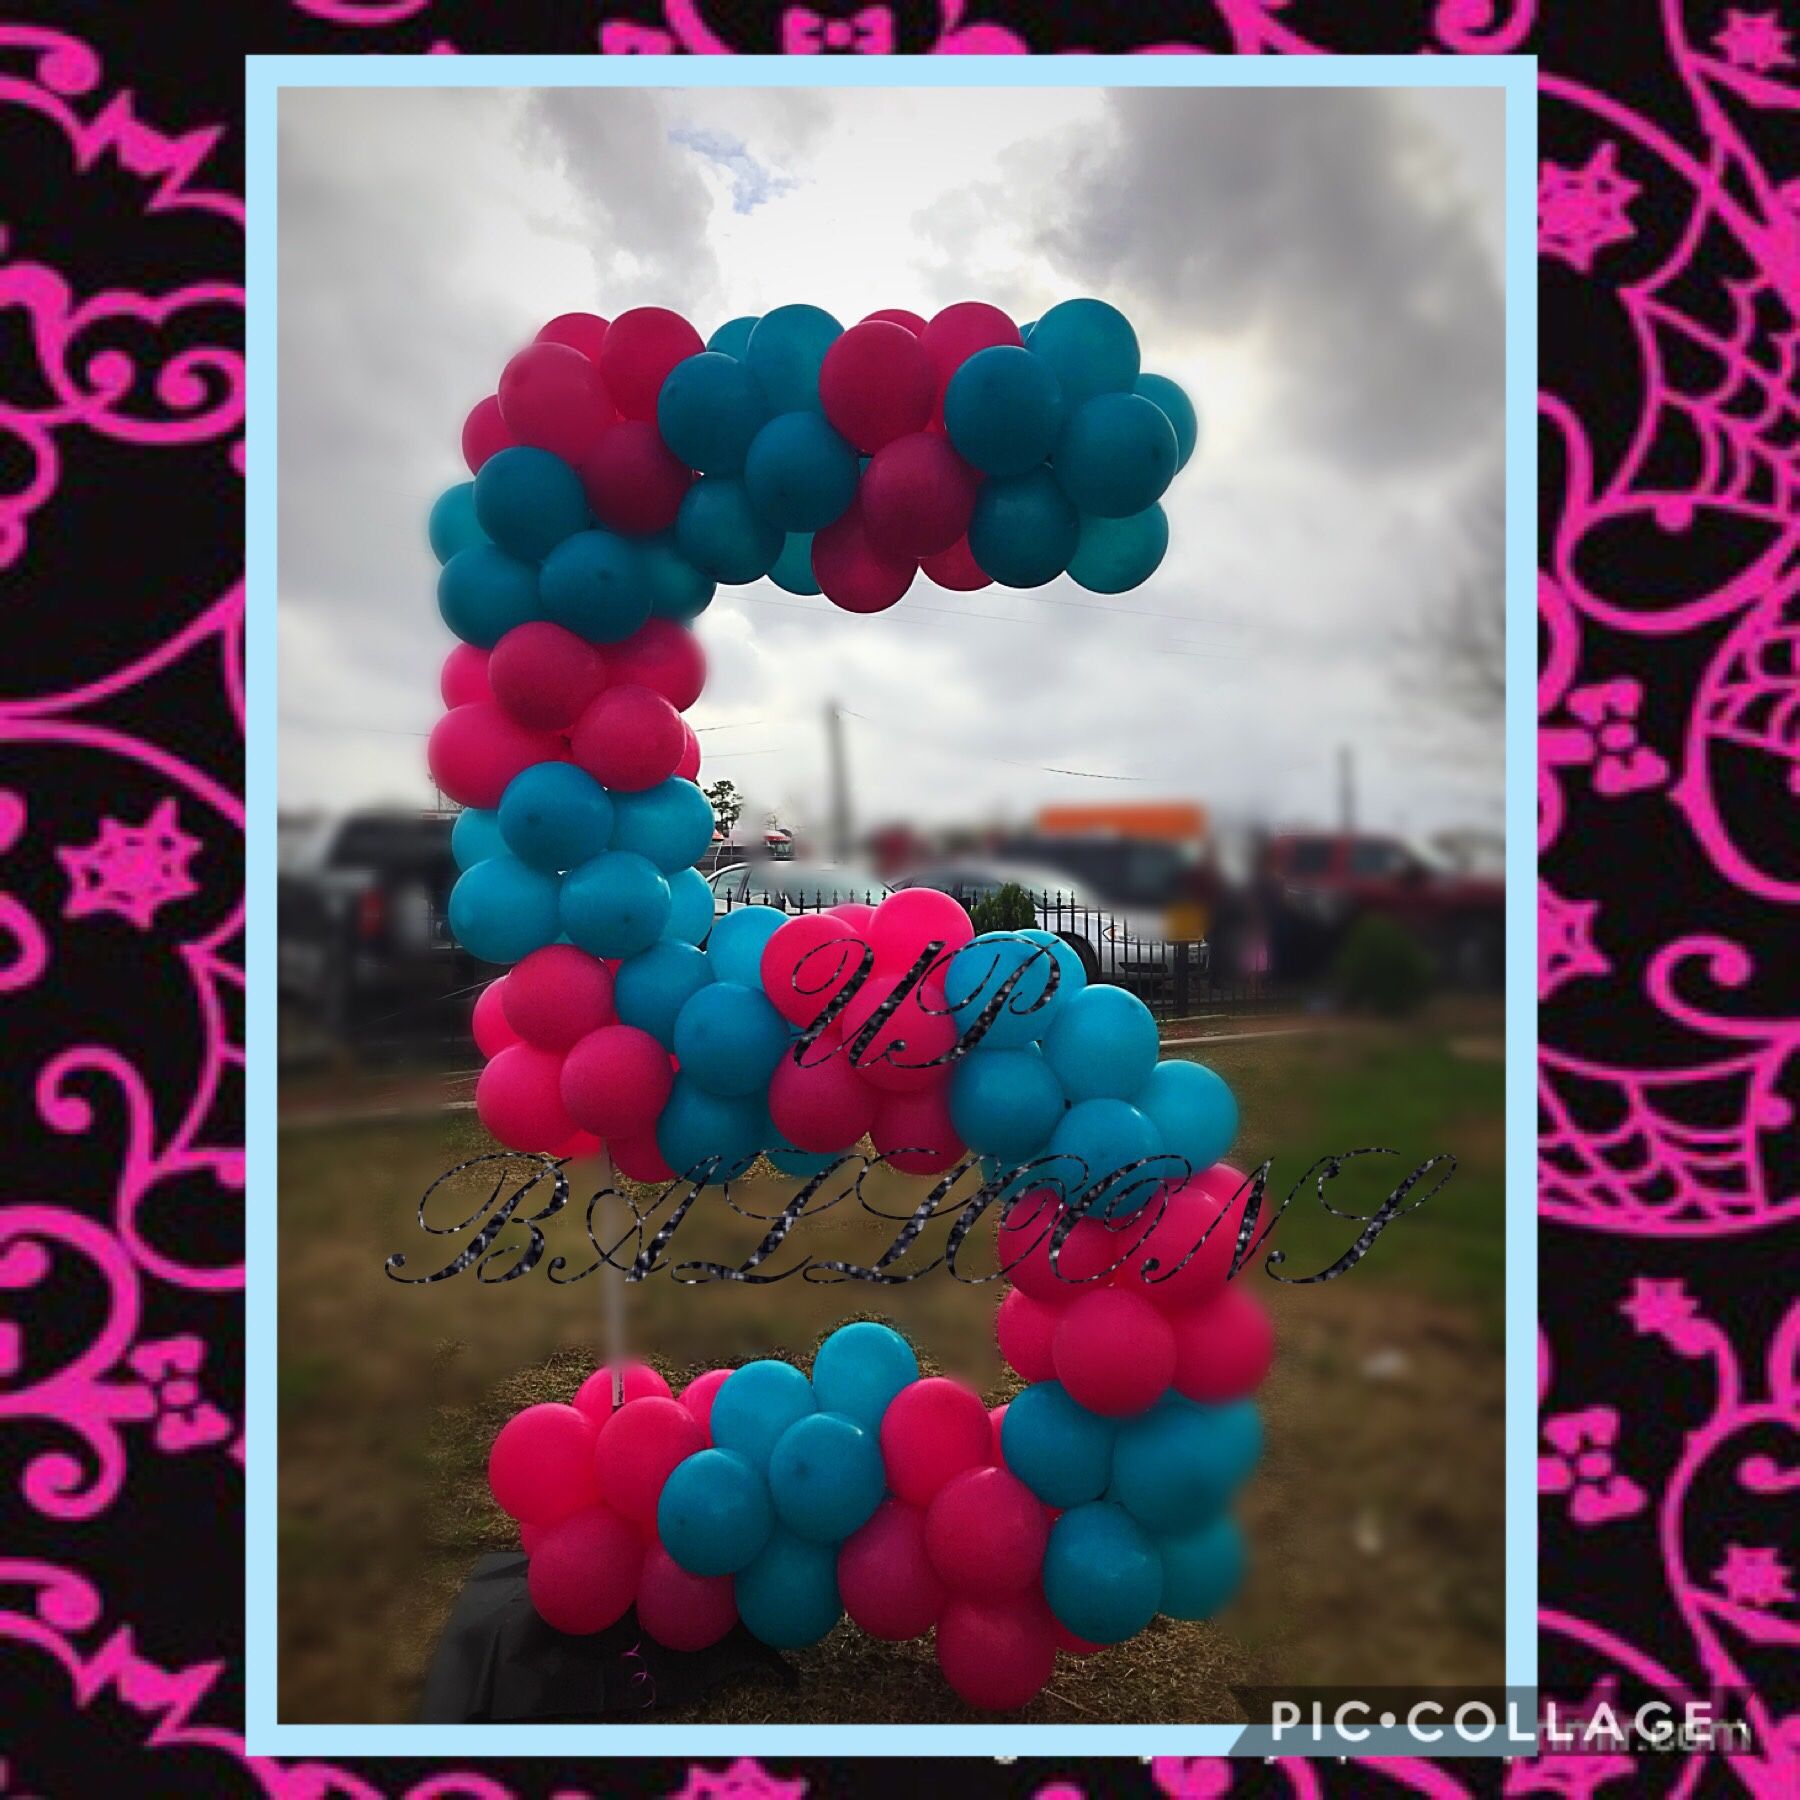 UP BALLOONS